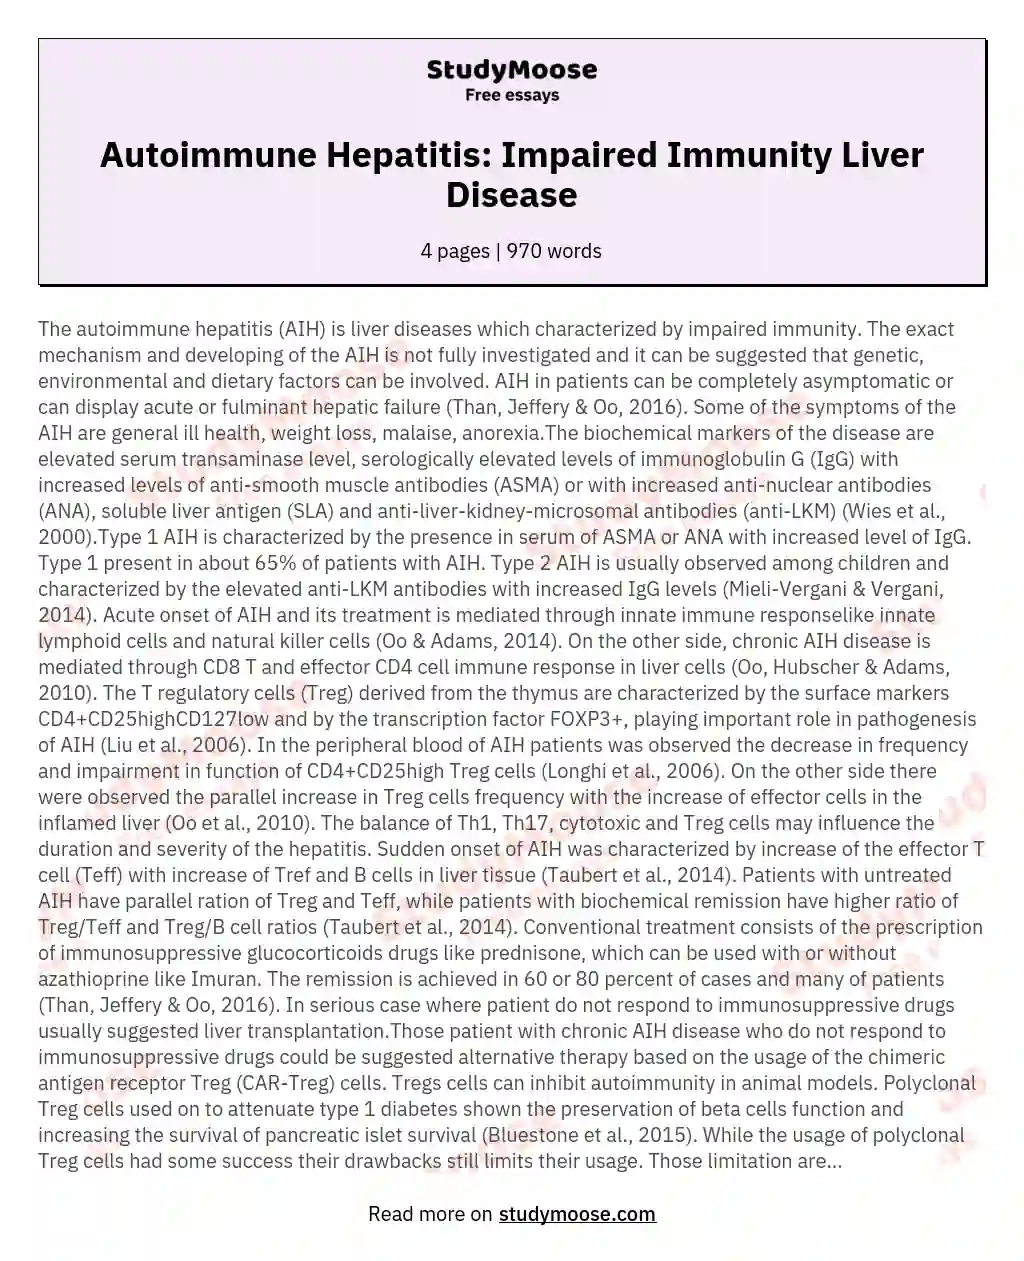 The autoimmune hepatitis AIH is liver diseases which characterized by impaired immunity